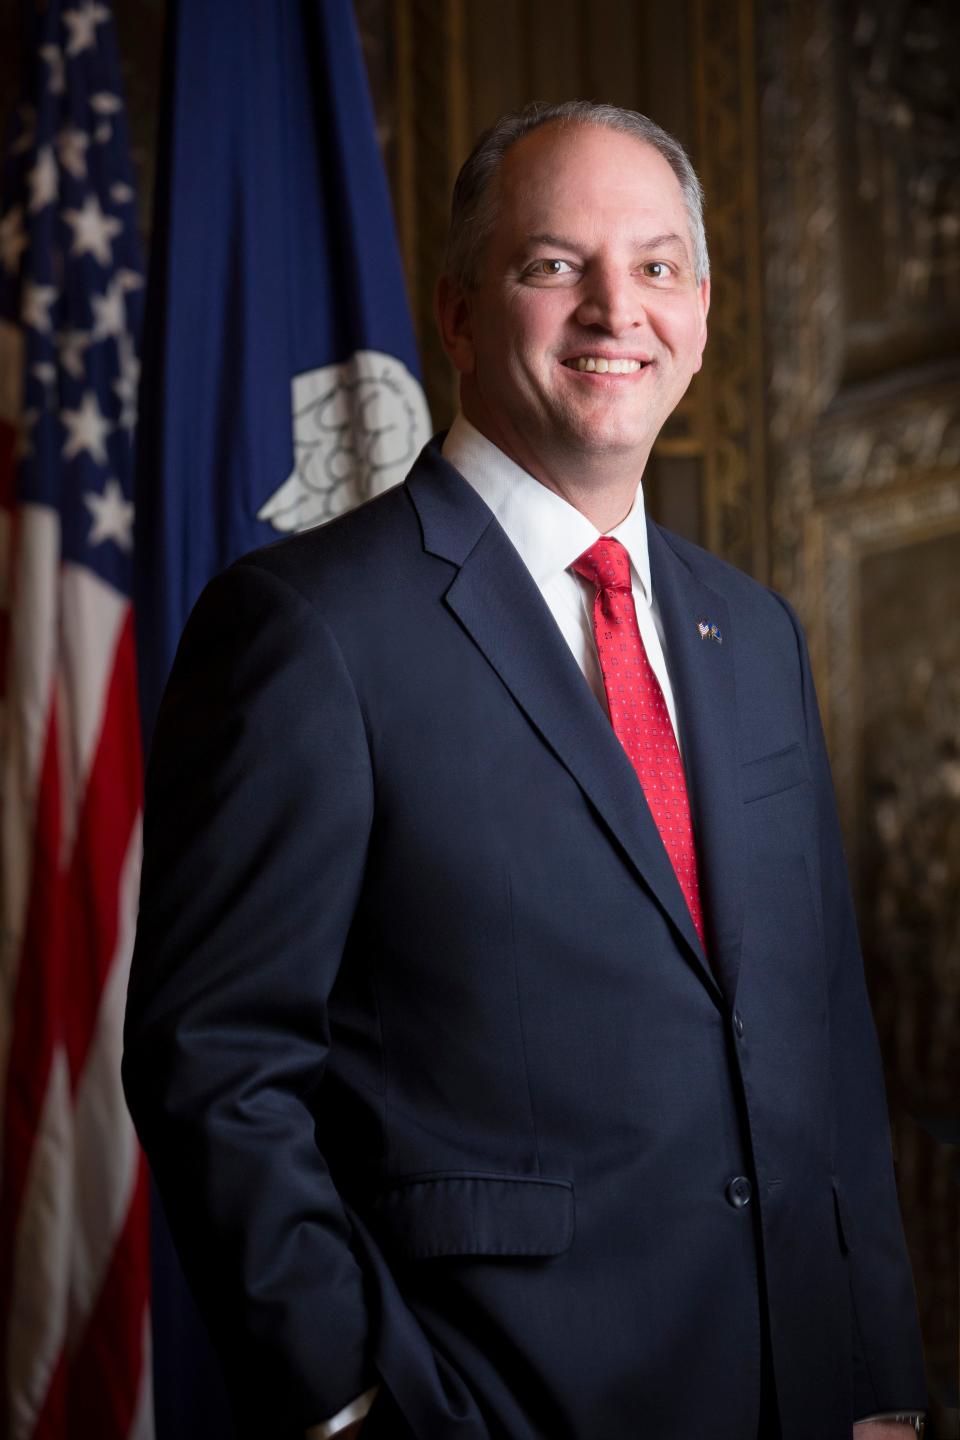 Louisiana Gov. John Bel Edwards' last Army assignment was with the 82nd Airborne Division.